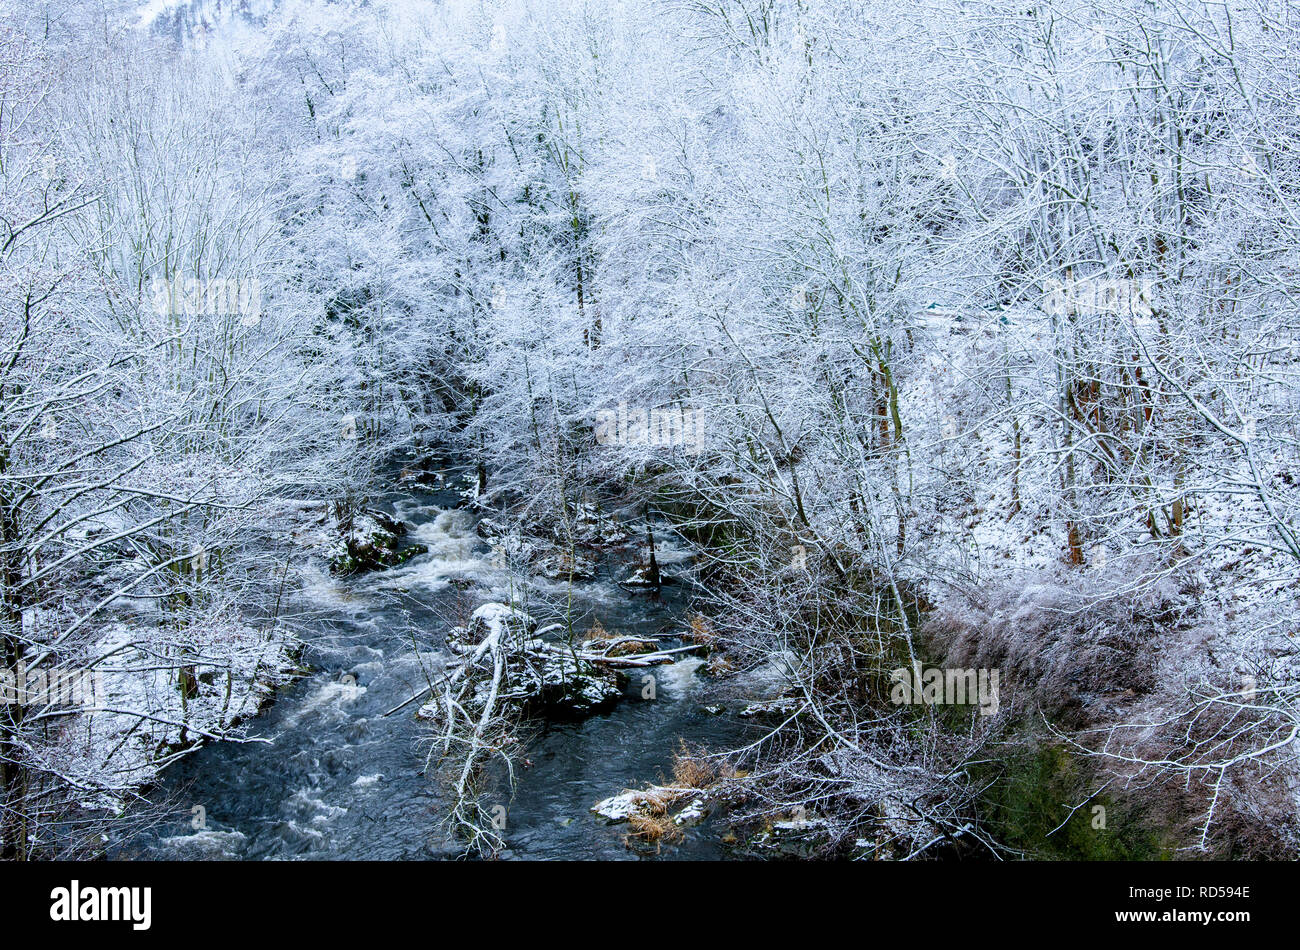 River Bode flowing through the white snowy forest by the town of thale at the foot of Harz mountains in central Germany Stock Photo